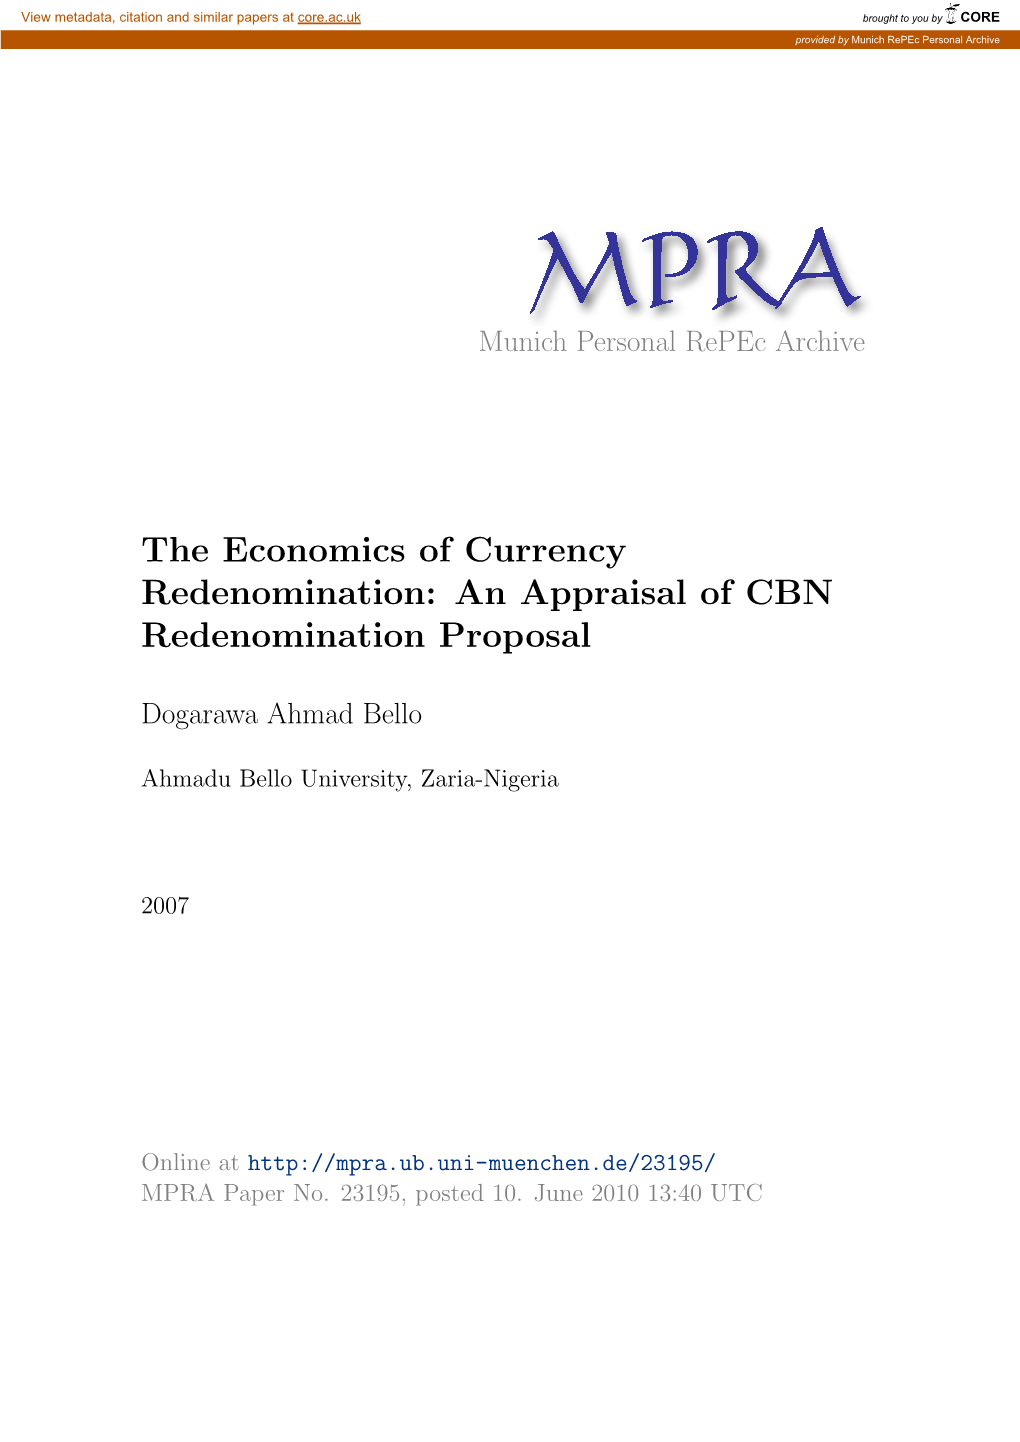 The Economics of Currency Redenomination: an Appraisal of CBN Redenomination Proposal